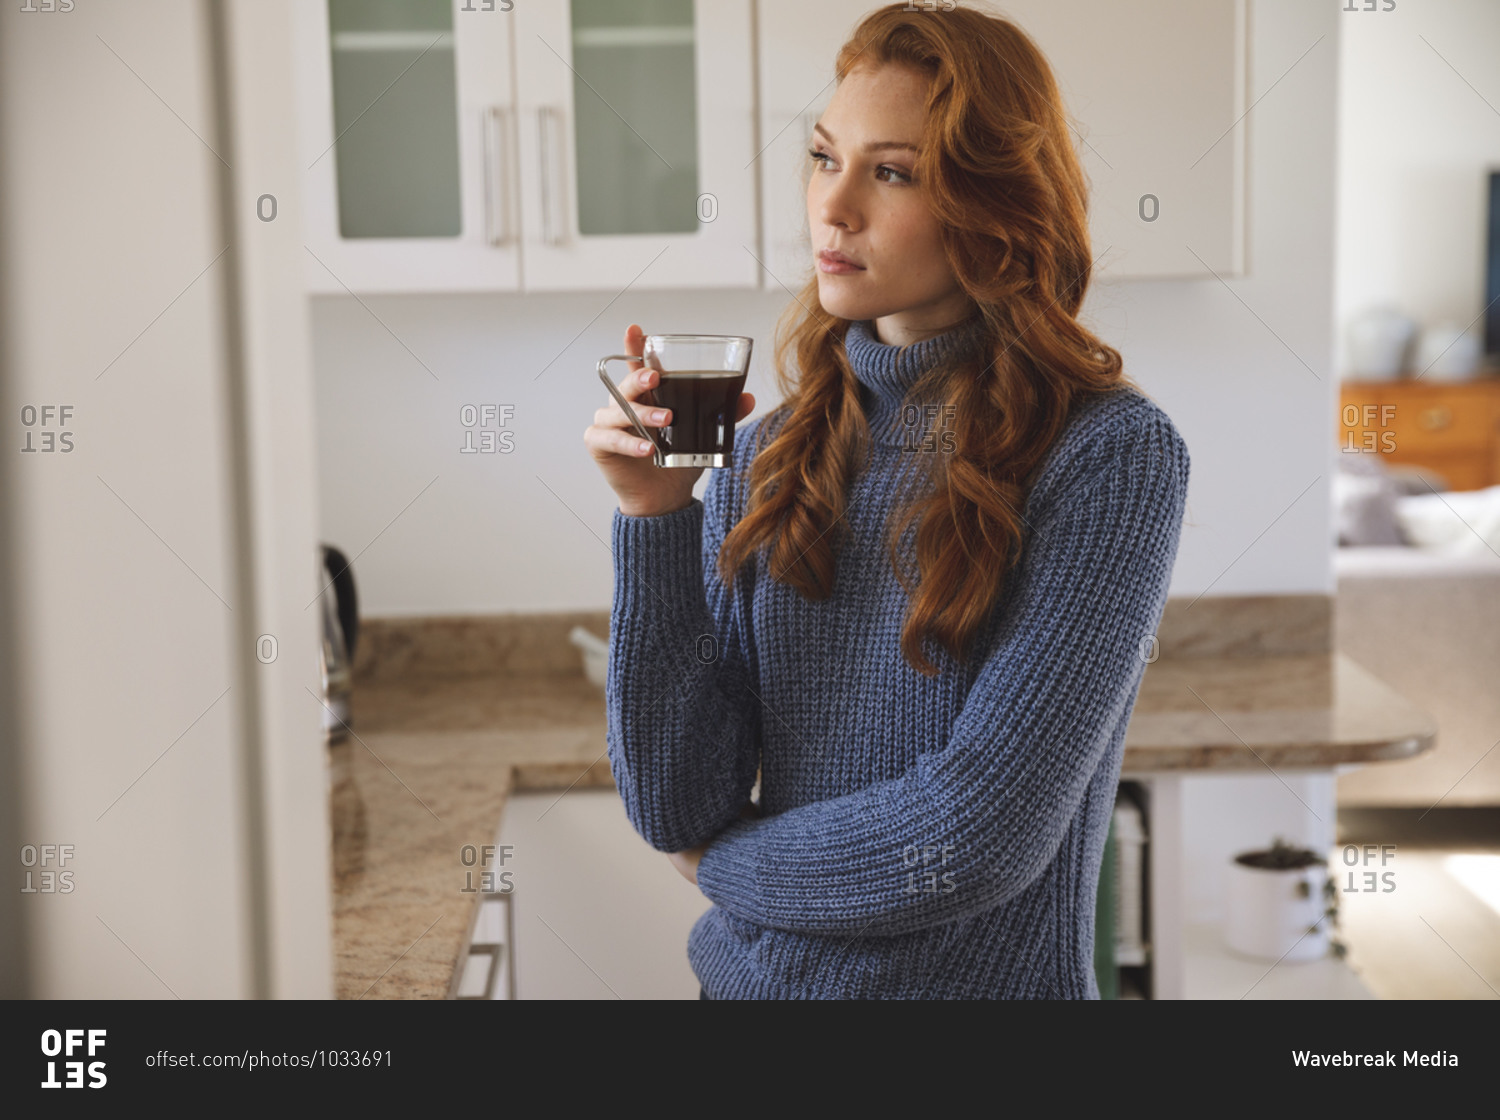 Caucasian woman spending time at home, in kitchen, looking serious, holding a cup, drinking coffee. Social distancing during Covid 19 Coronavirus quarantine lockdown.